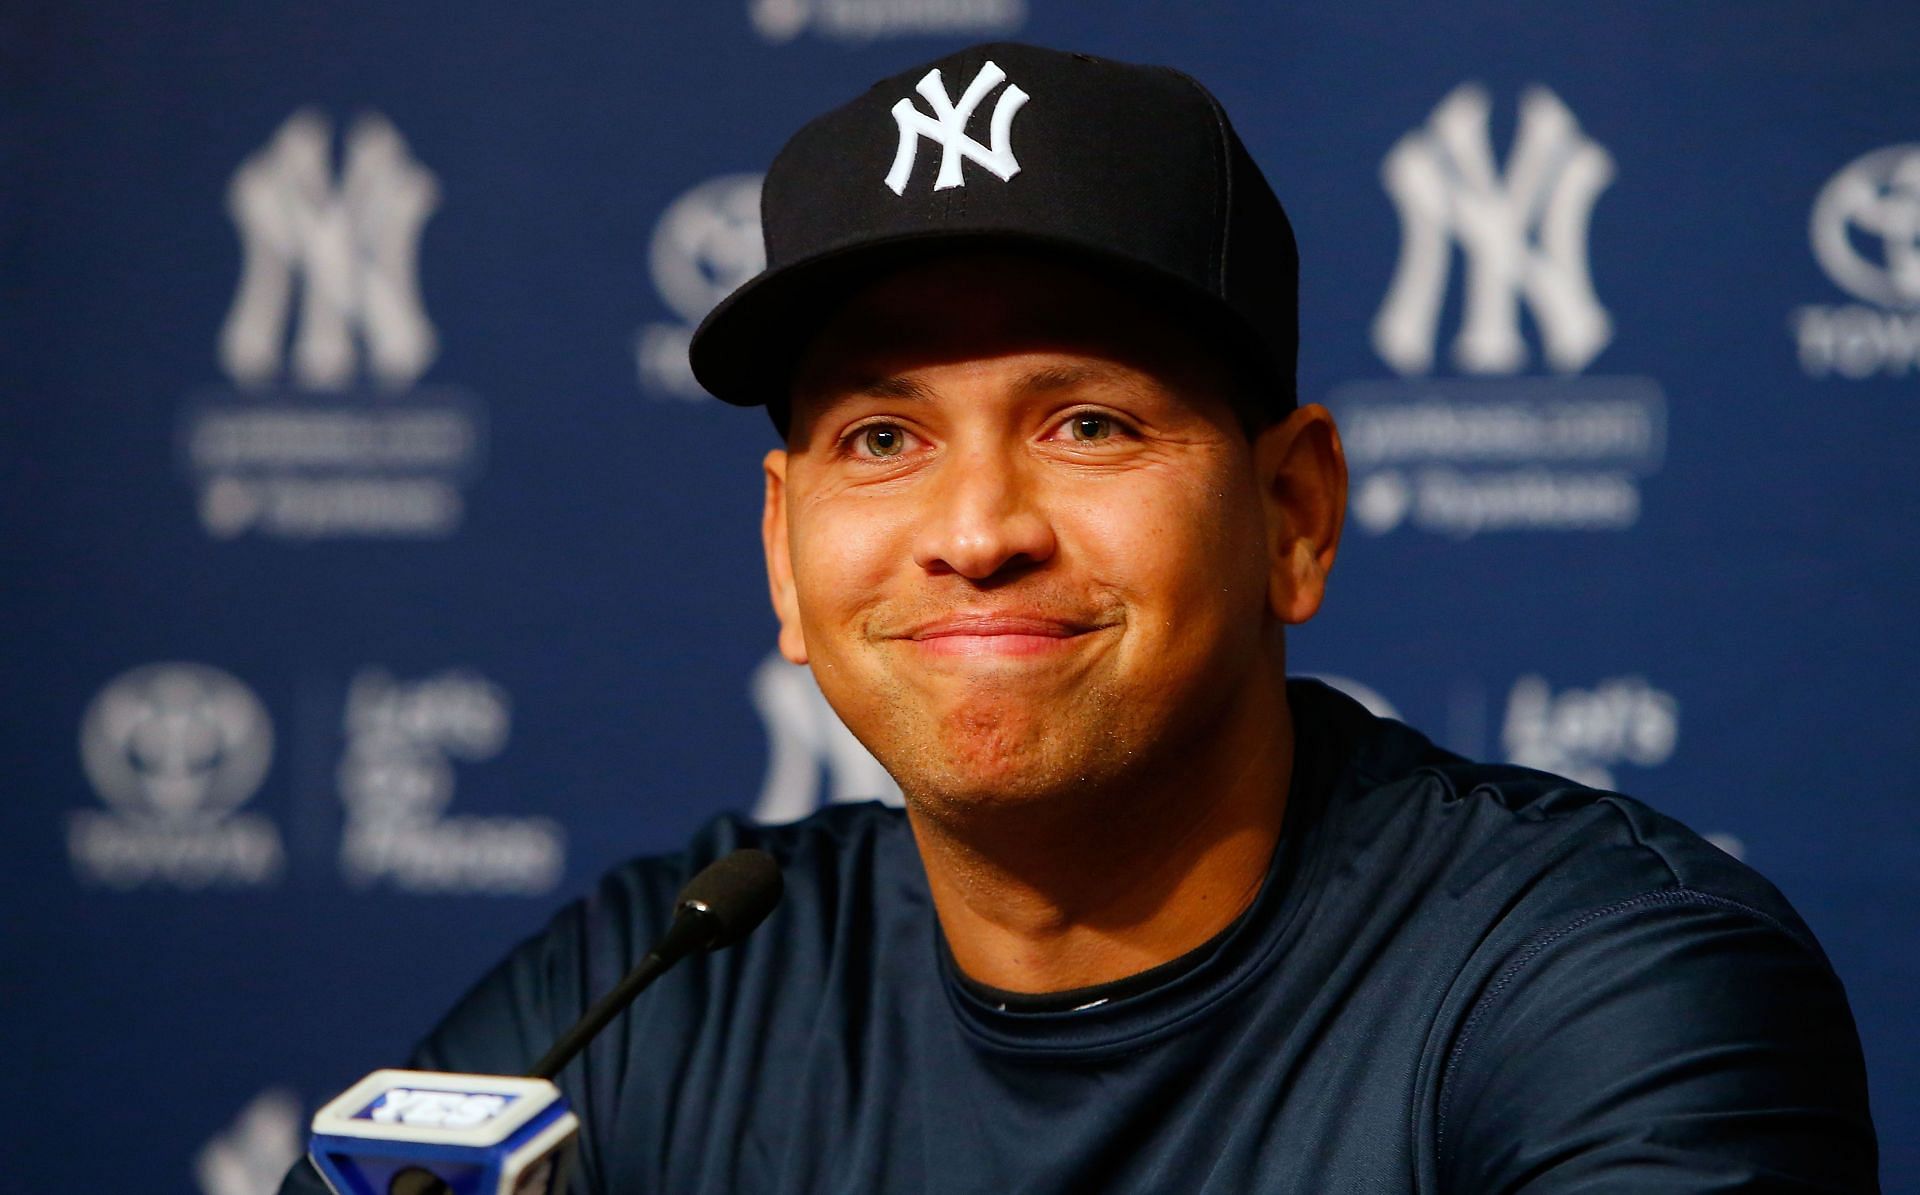 Alex Rodriguez played for the New York Yankees